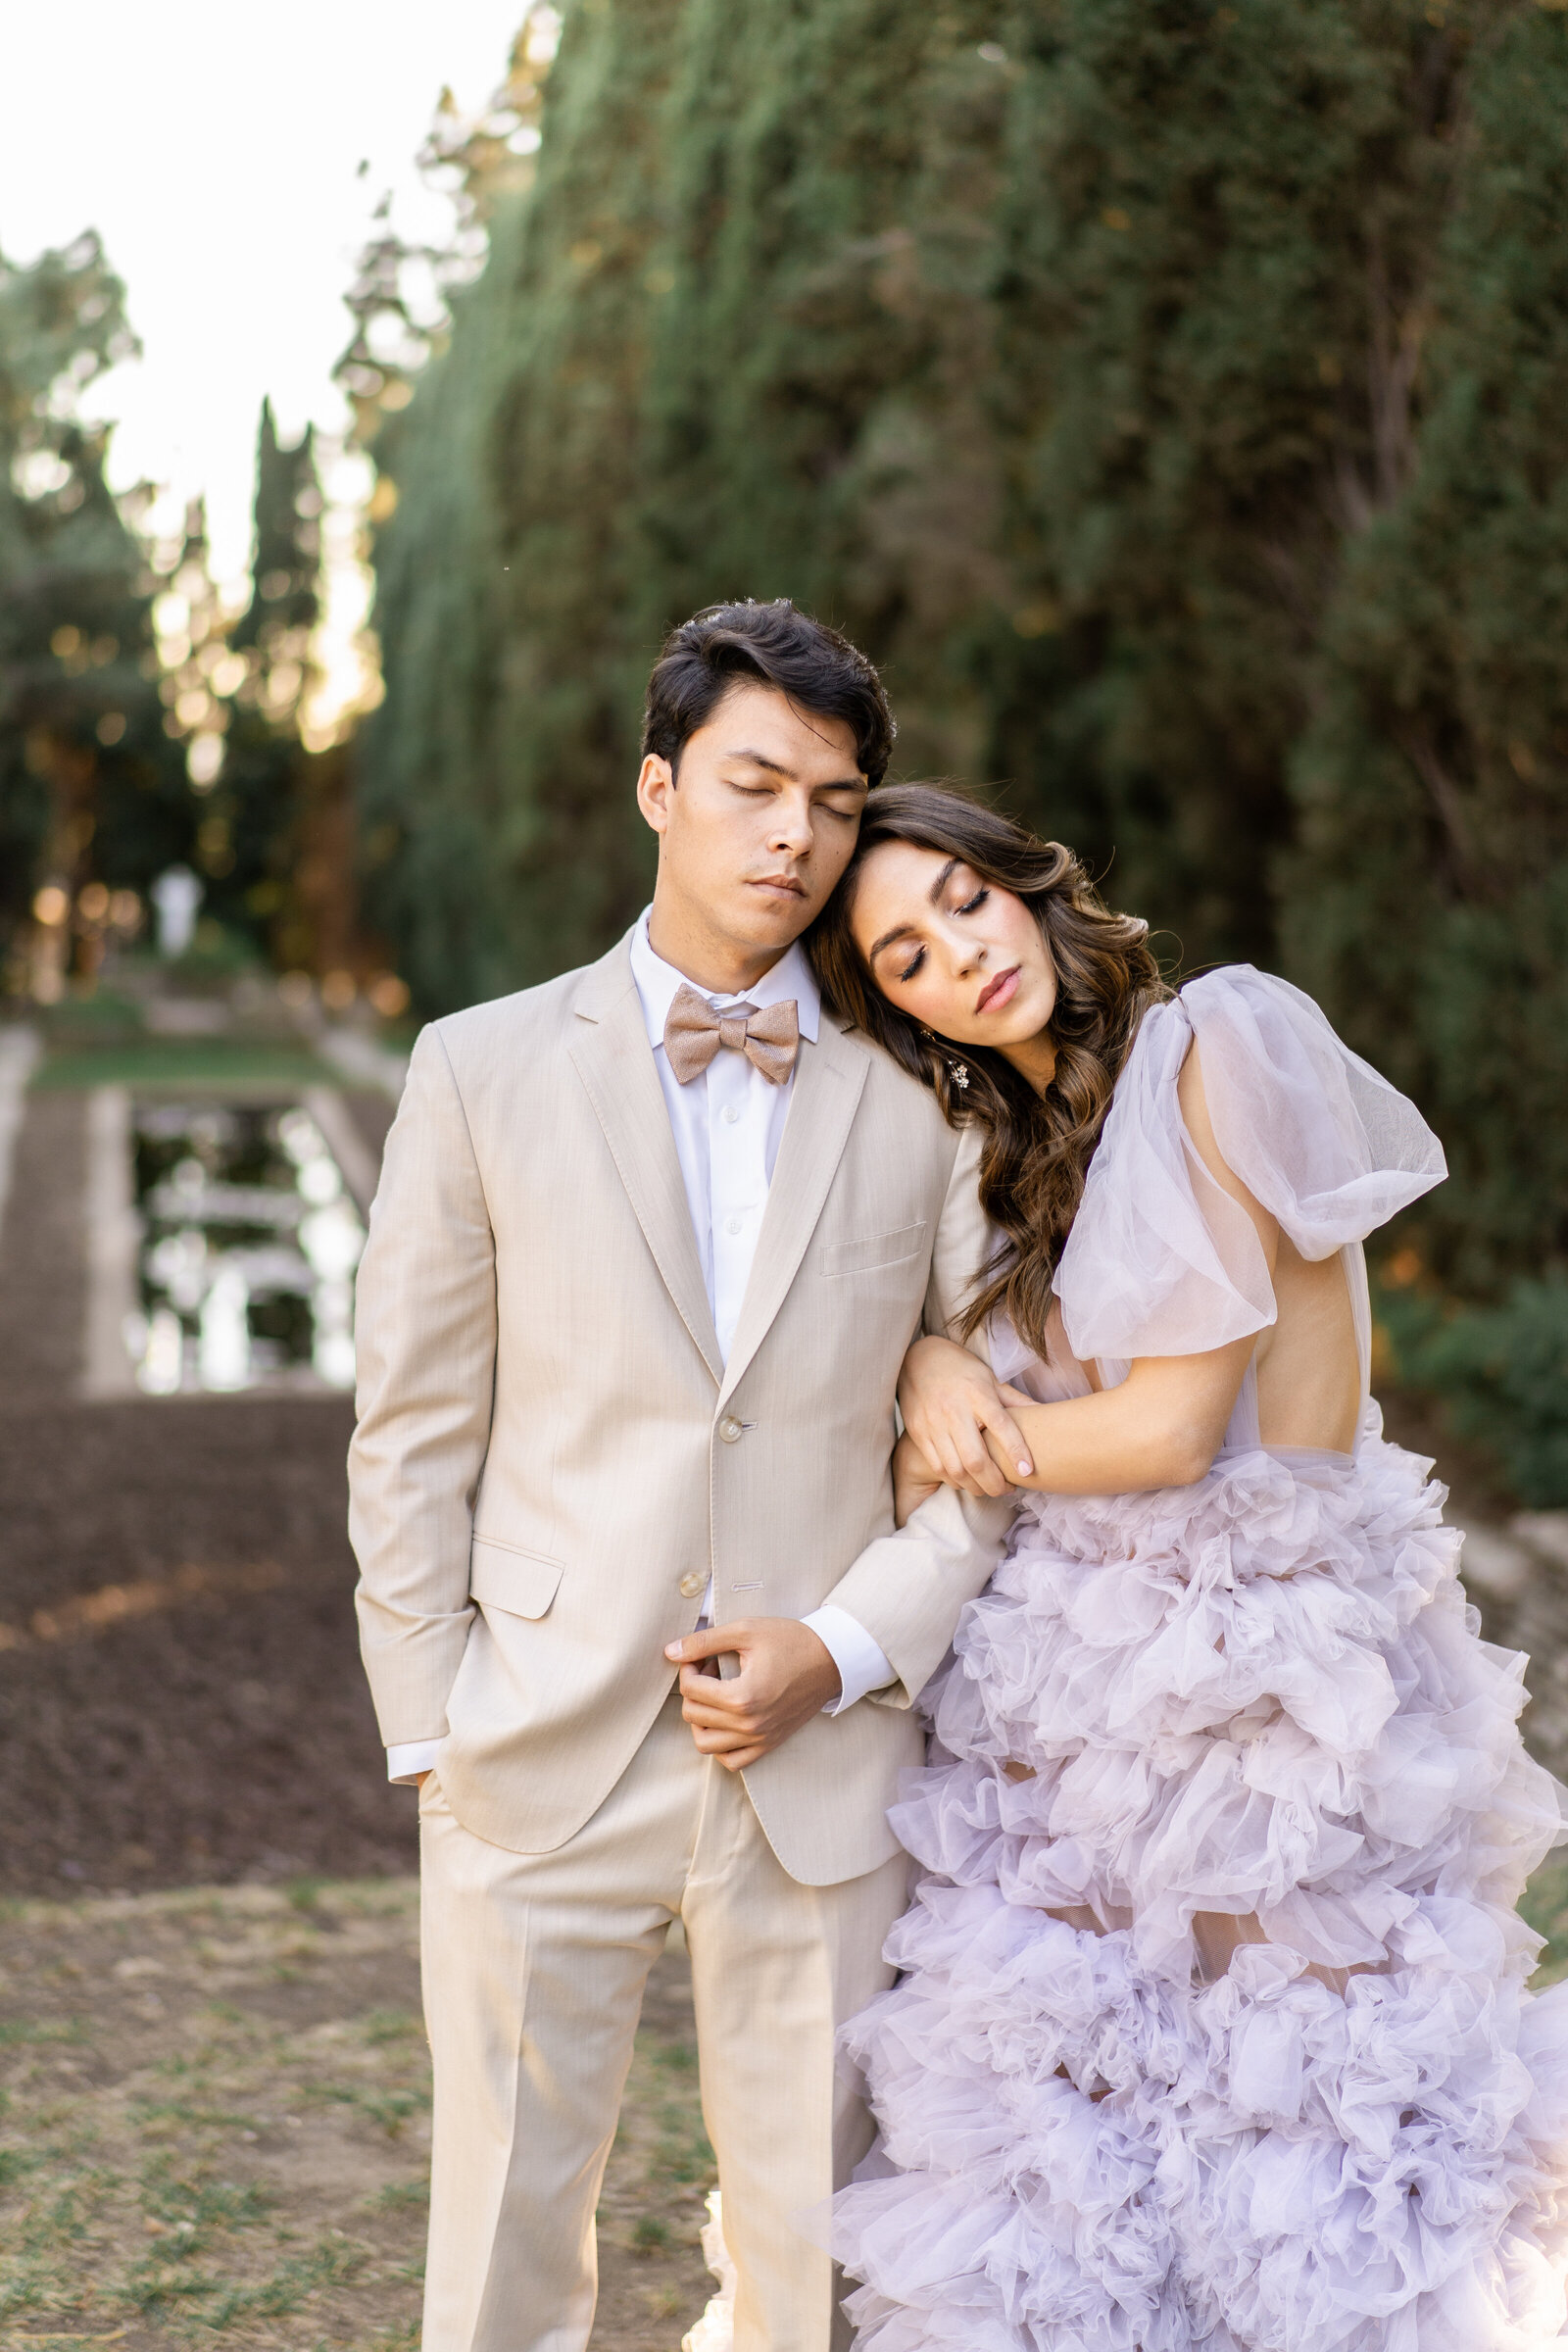 Portrait of bride and groom in a lavender gown and cream suit standing near a water structure and large trees.